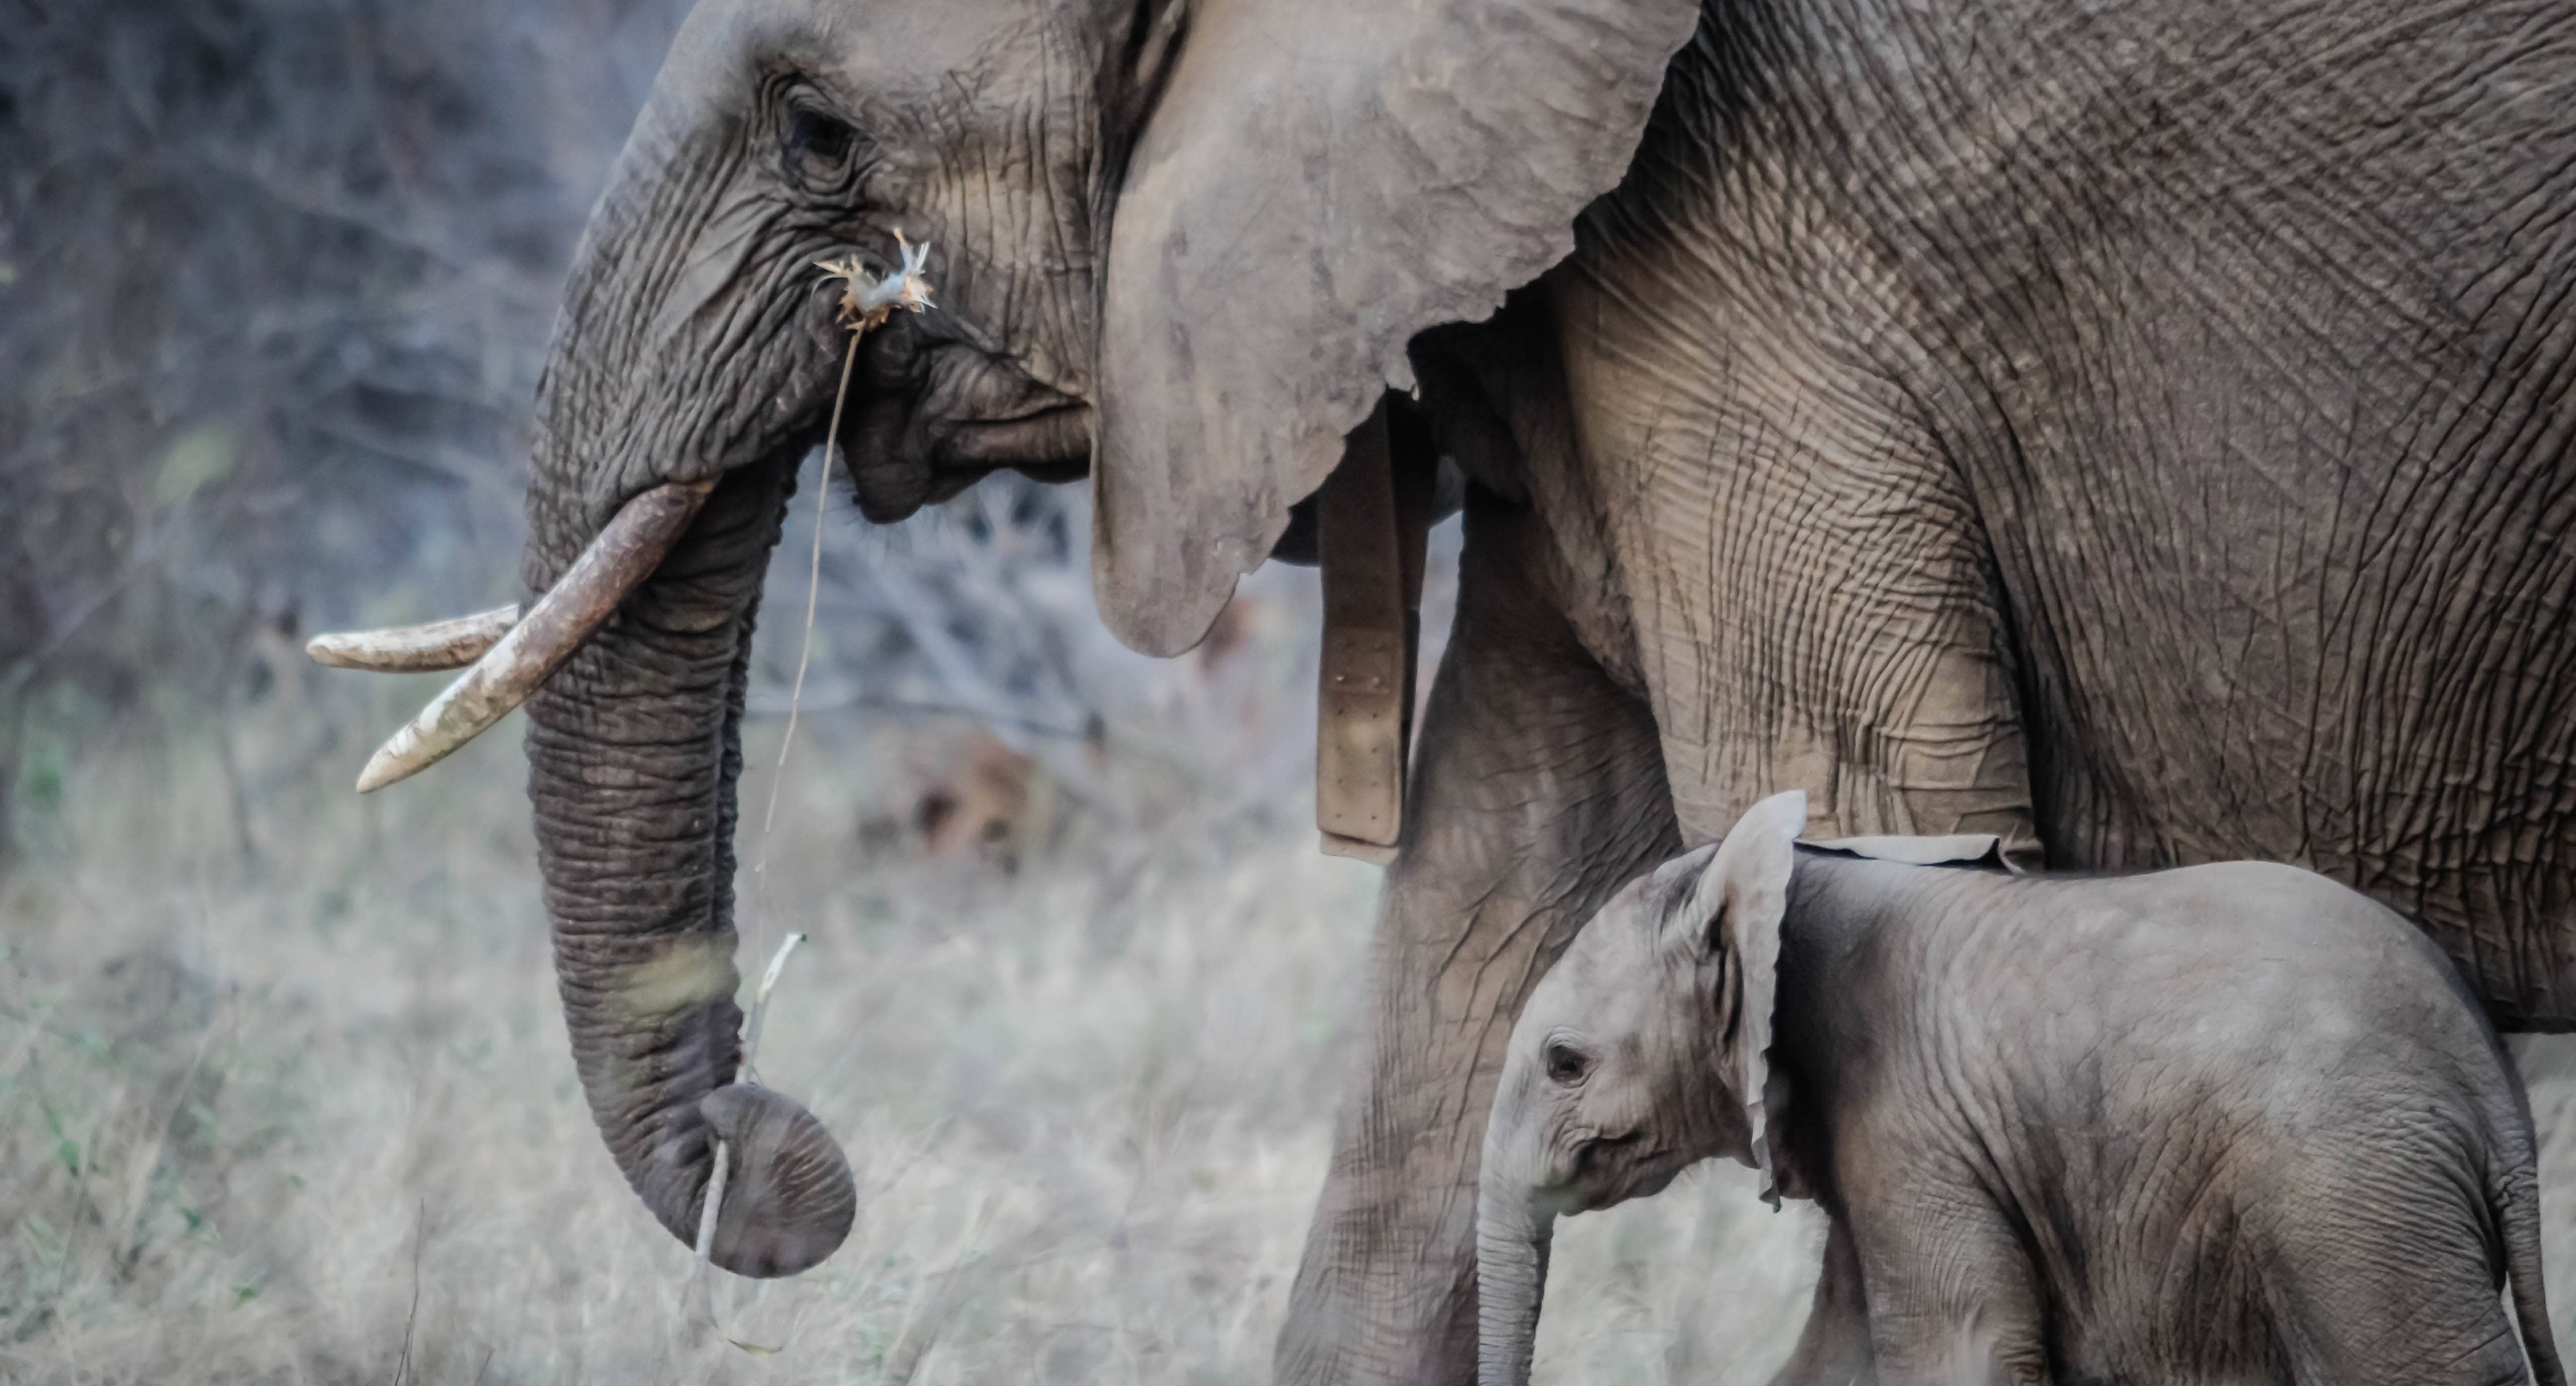 Mother and baby elephant in Kenya